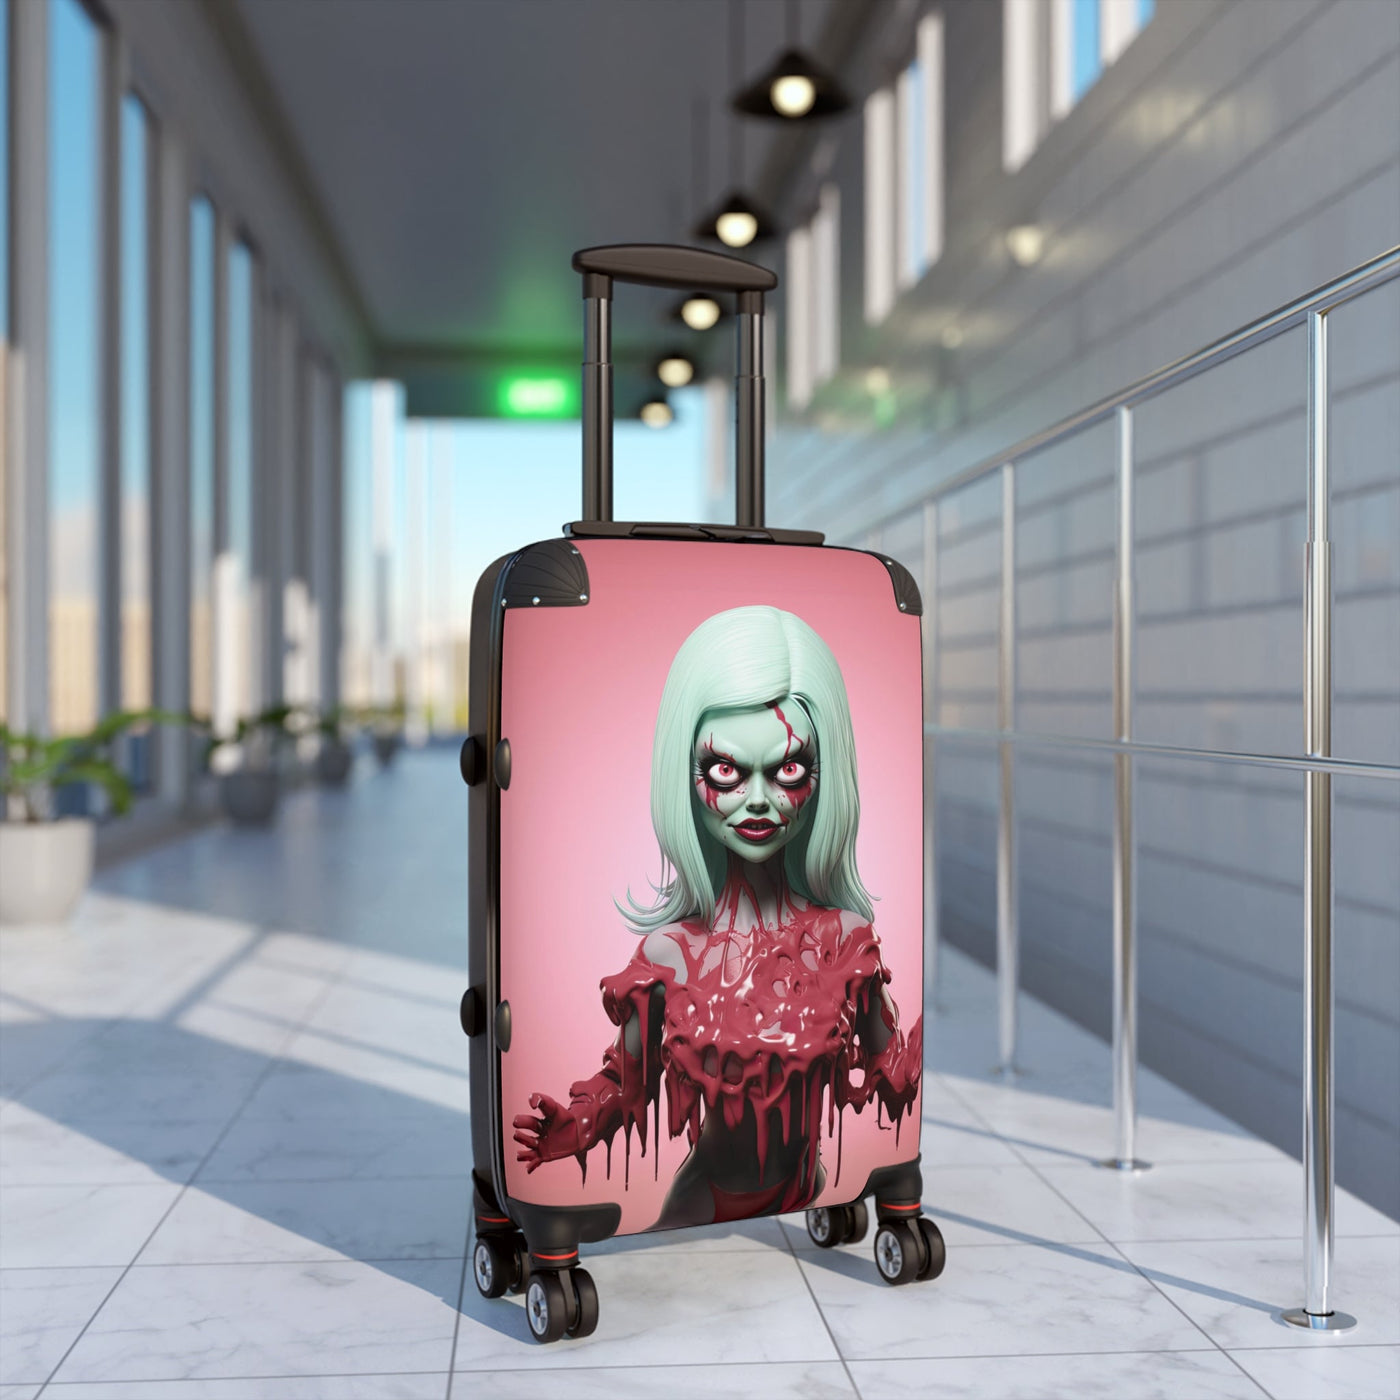 Choco Monster Doll Pop Surreal Travel Suitcase Luggage